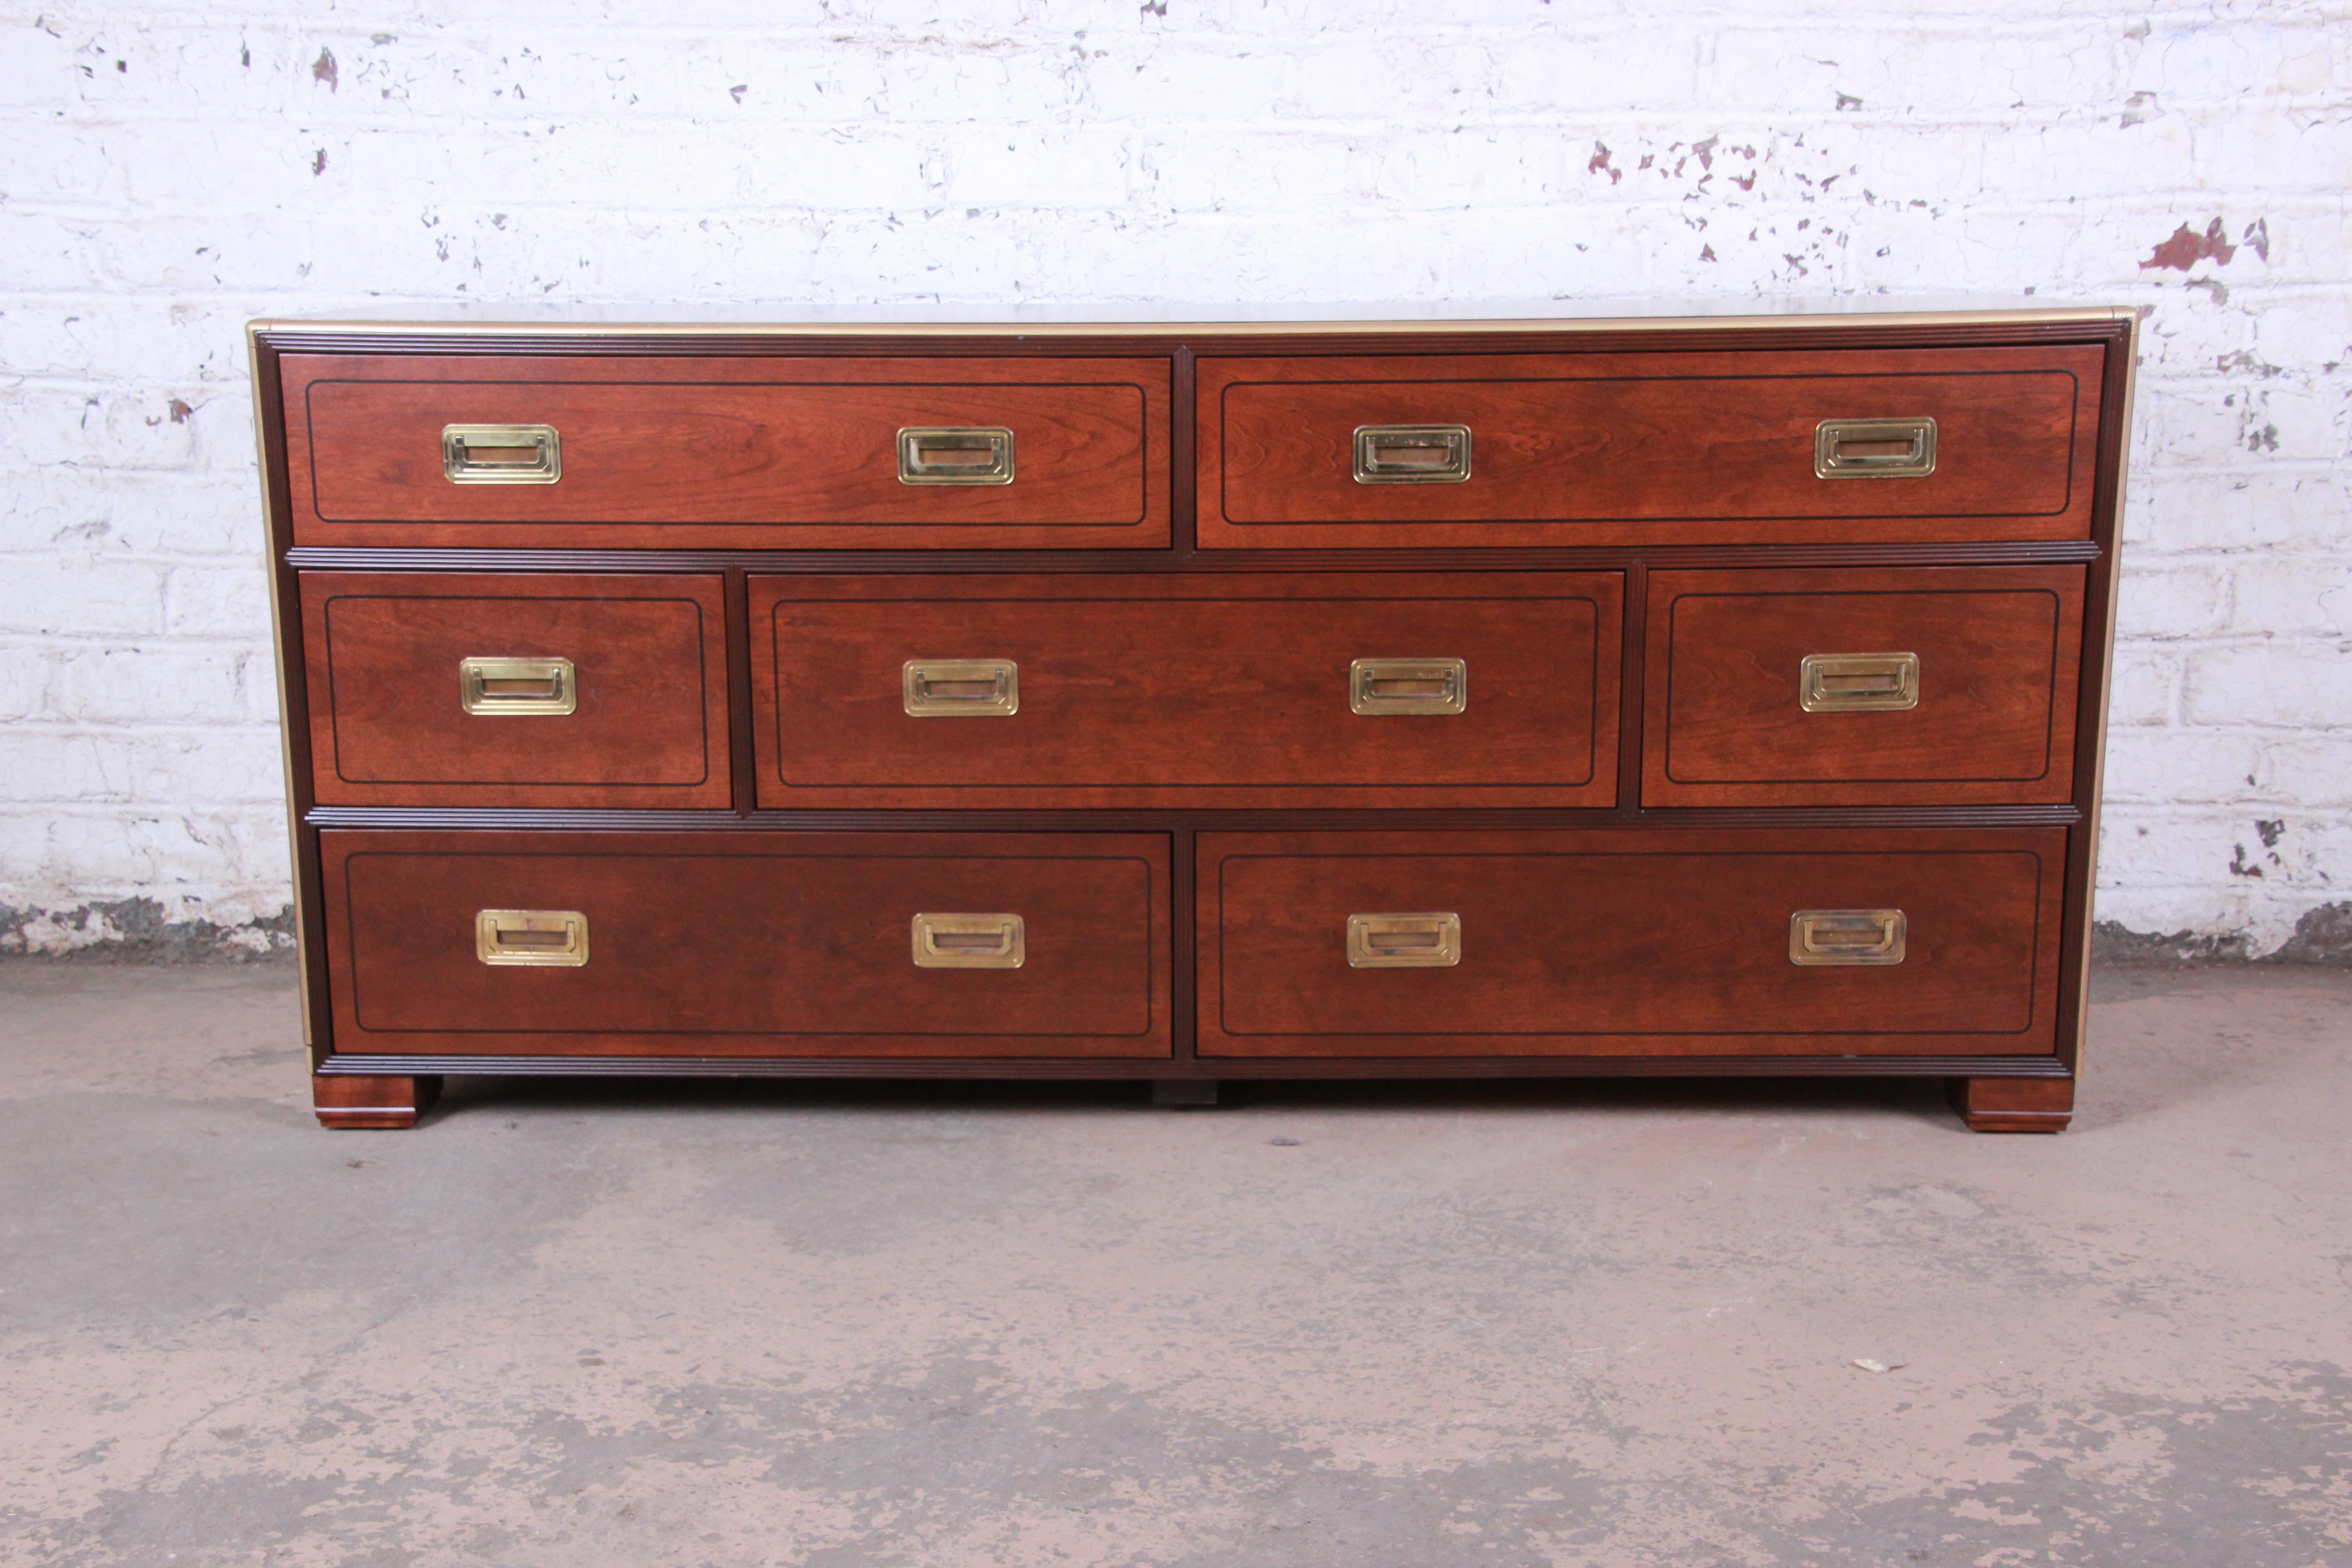 An exceptional Hollywood Regency Campaign style long dresser or credenza by Baker Furniture. The dresser features gorgeous walnut wood grain with inlaid details and brass trim. It offers ample storage, with seven deep dovetailed drawers. Hardware is